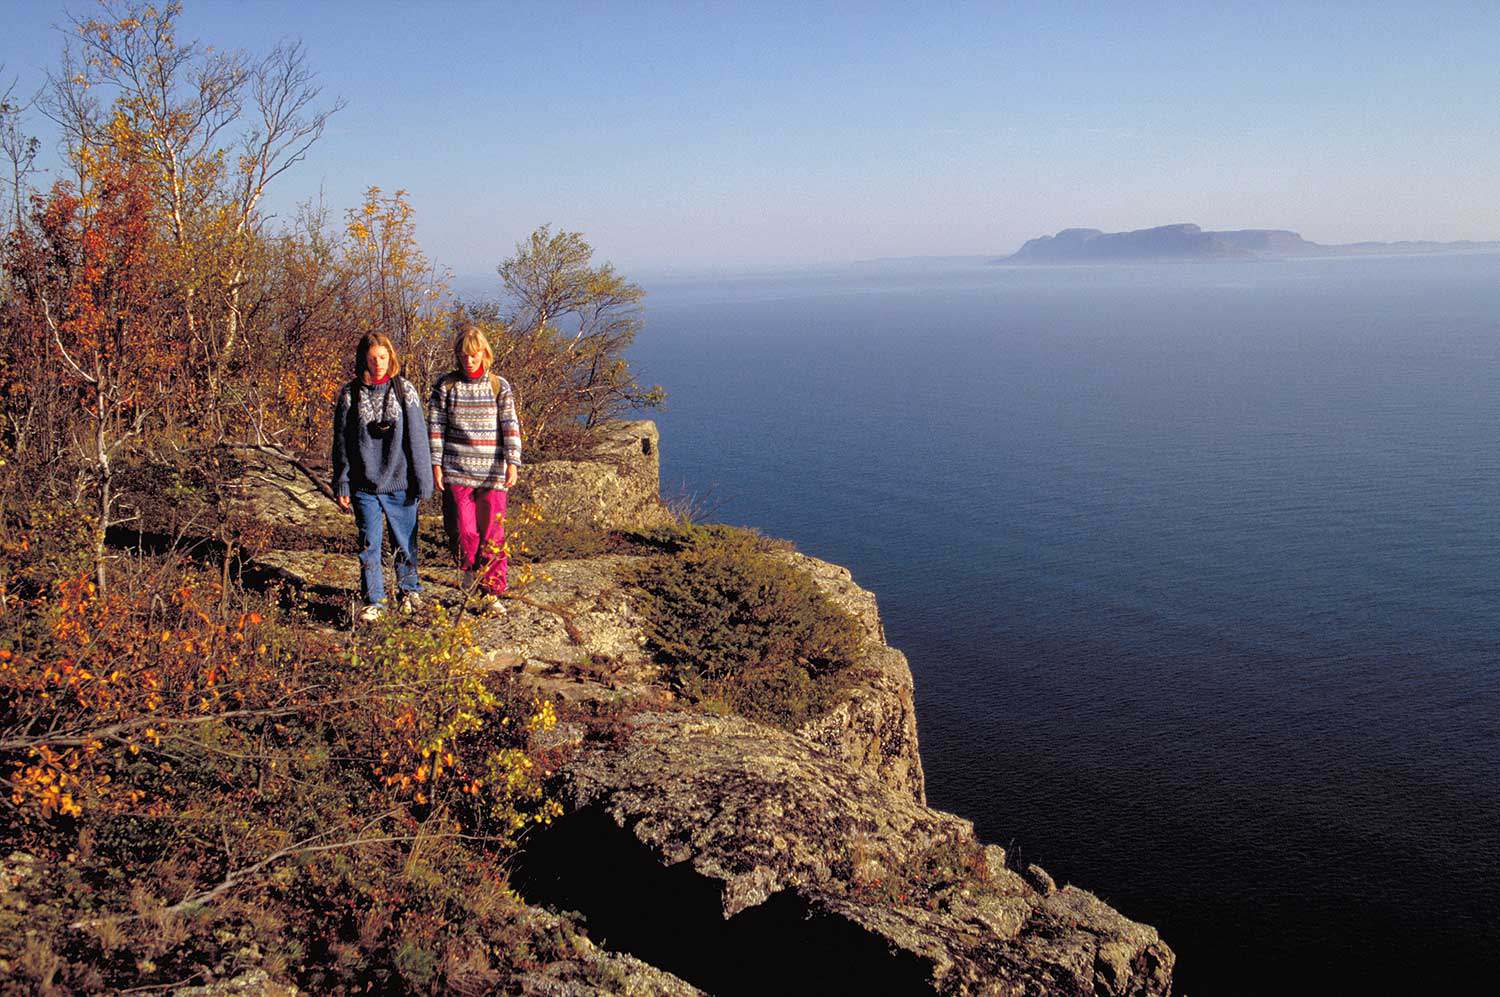 Recreational hiking in the picturesque Thunder Bay area (Photo: Ontario Tourism)